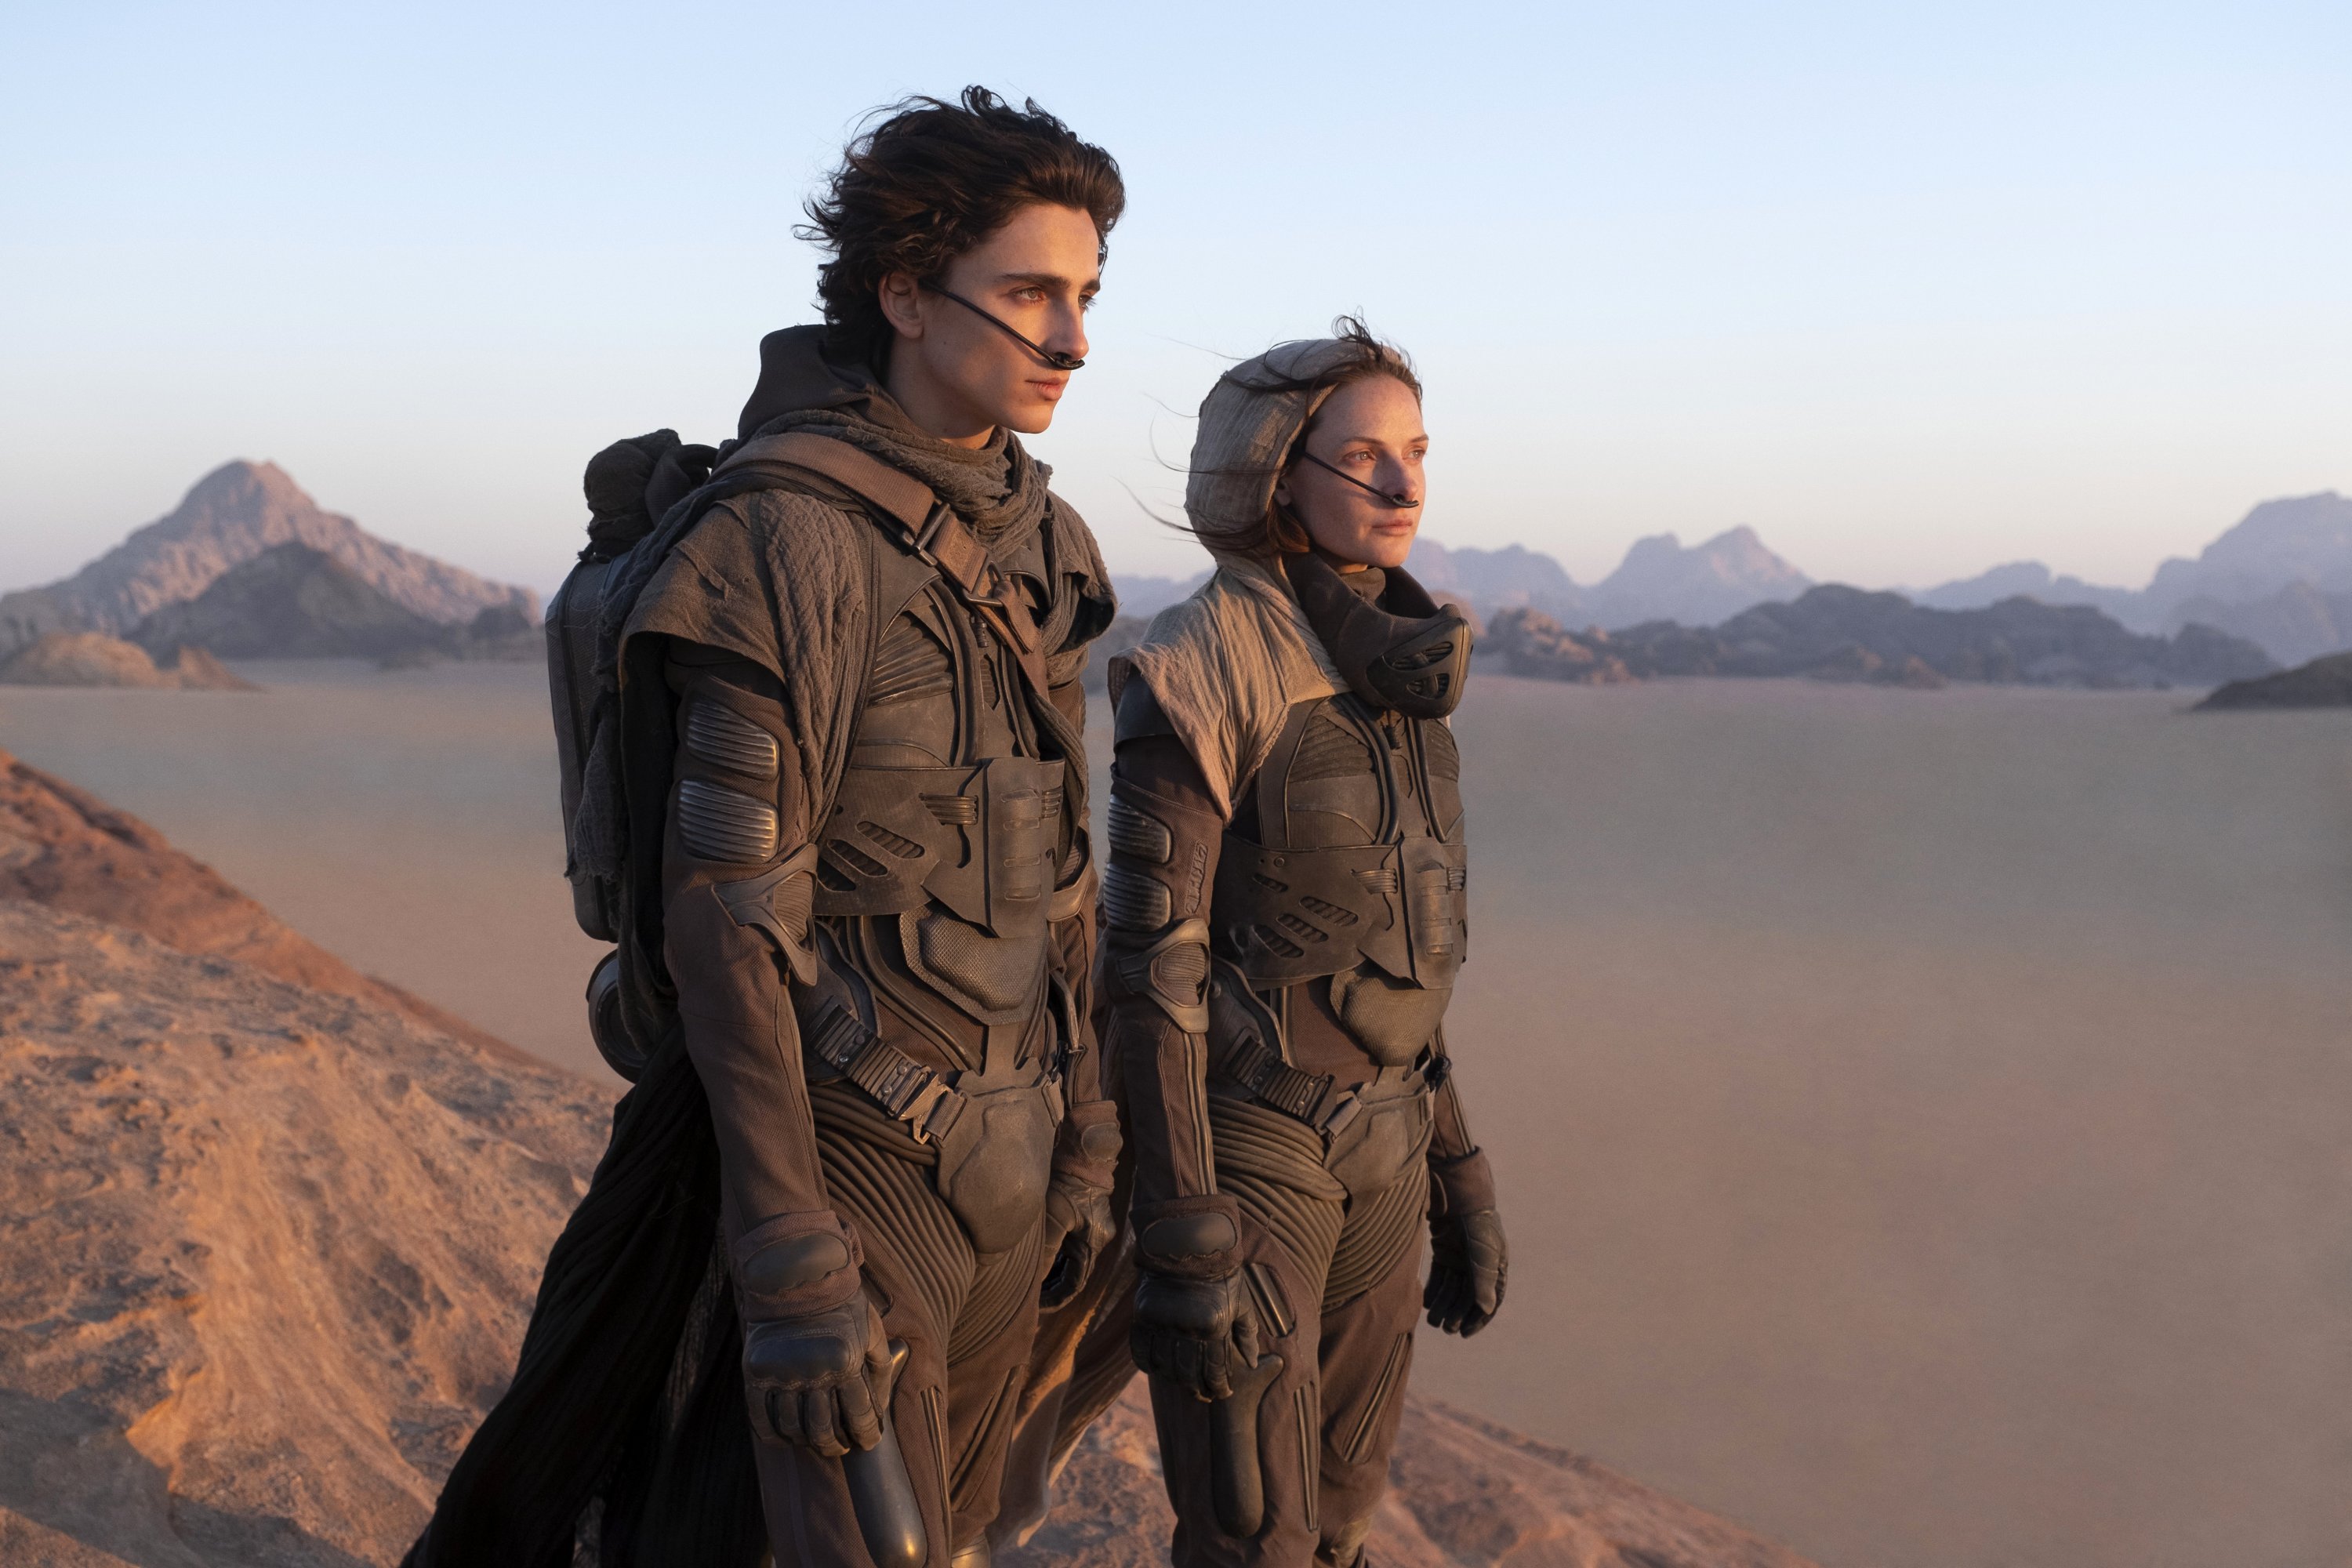 Timothee Chalamet (L) and Rebecca Ferguson in a scene from "Dune." (Warner Bros. Pictures handout via AP)